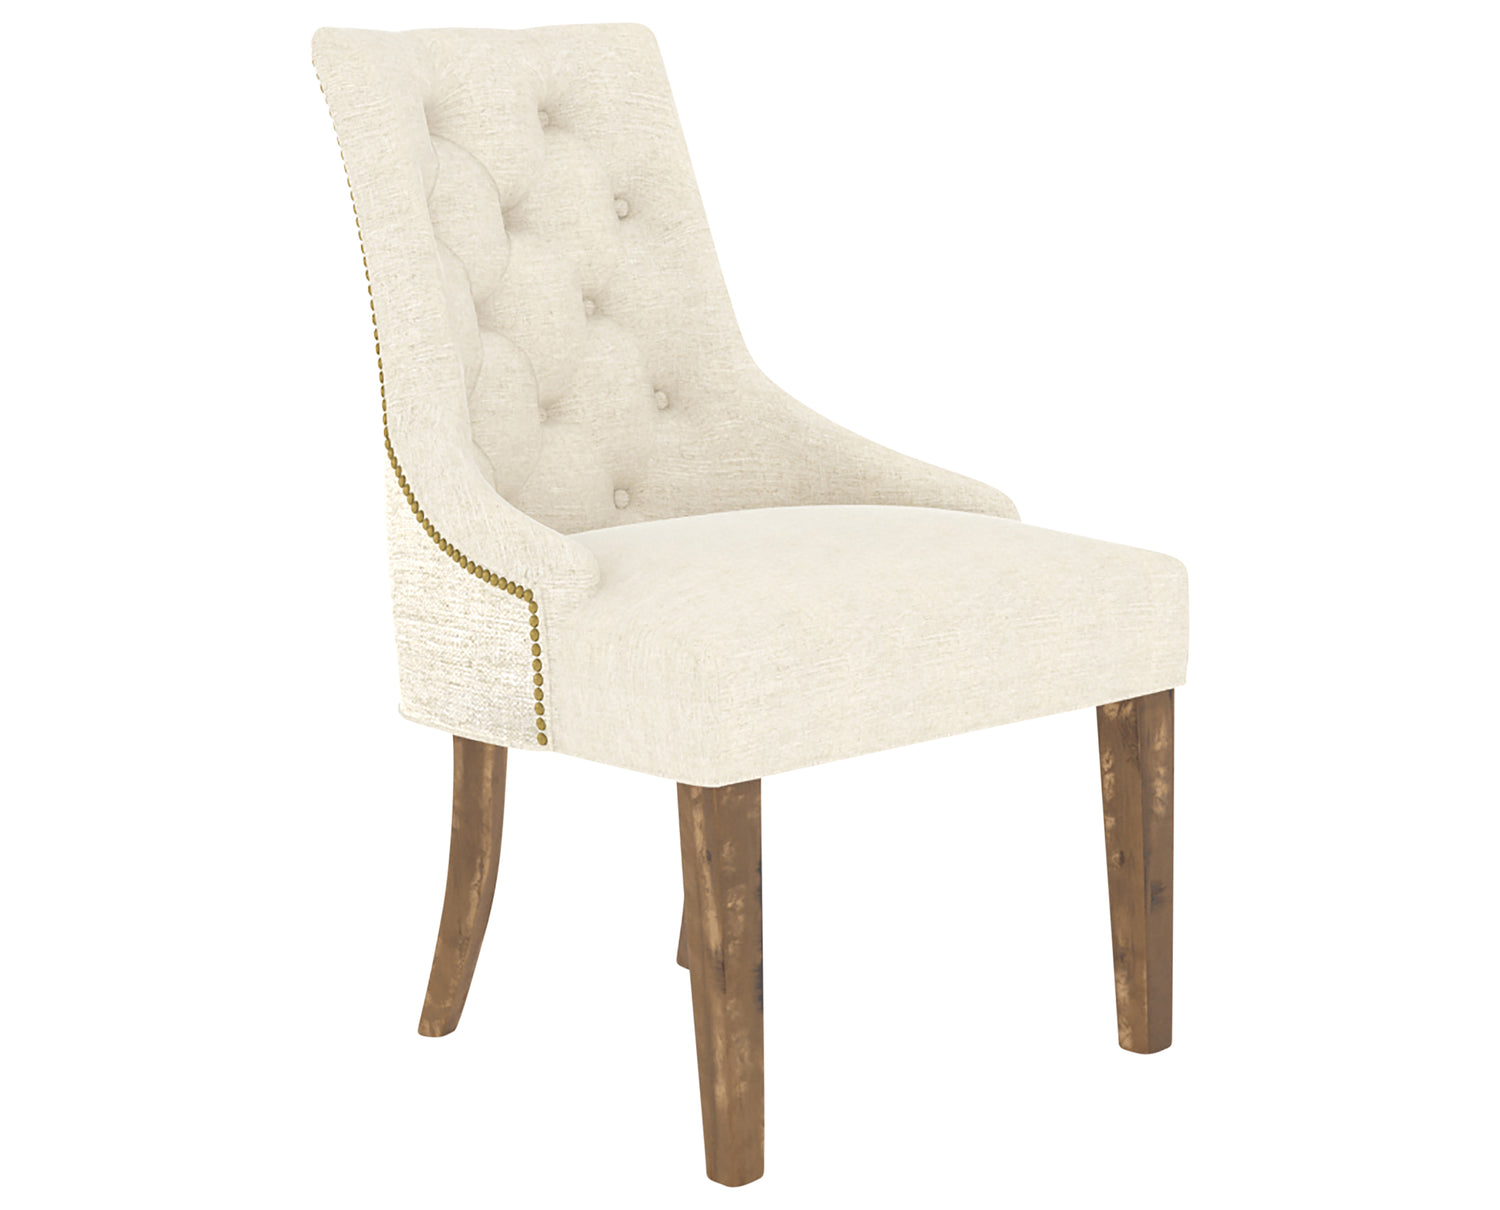 Oak Washed and Fabric TW with Antique Brass Nails | Canadel Champlain Dining Chair 318 | Valley Ridge Furniture